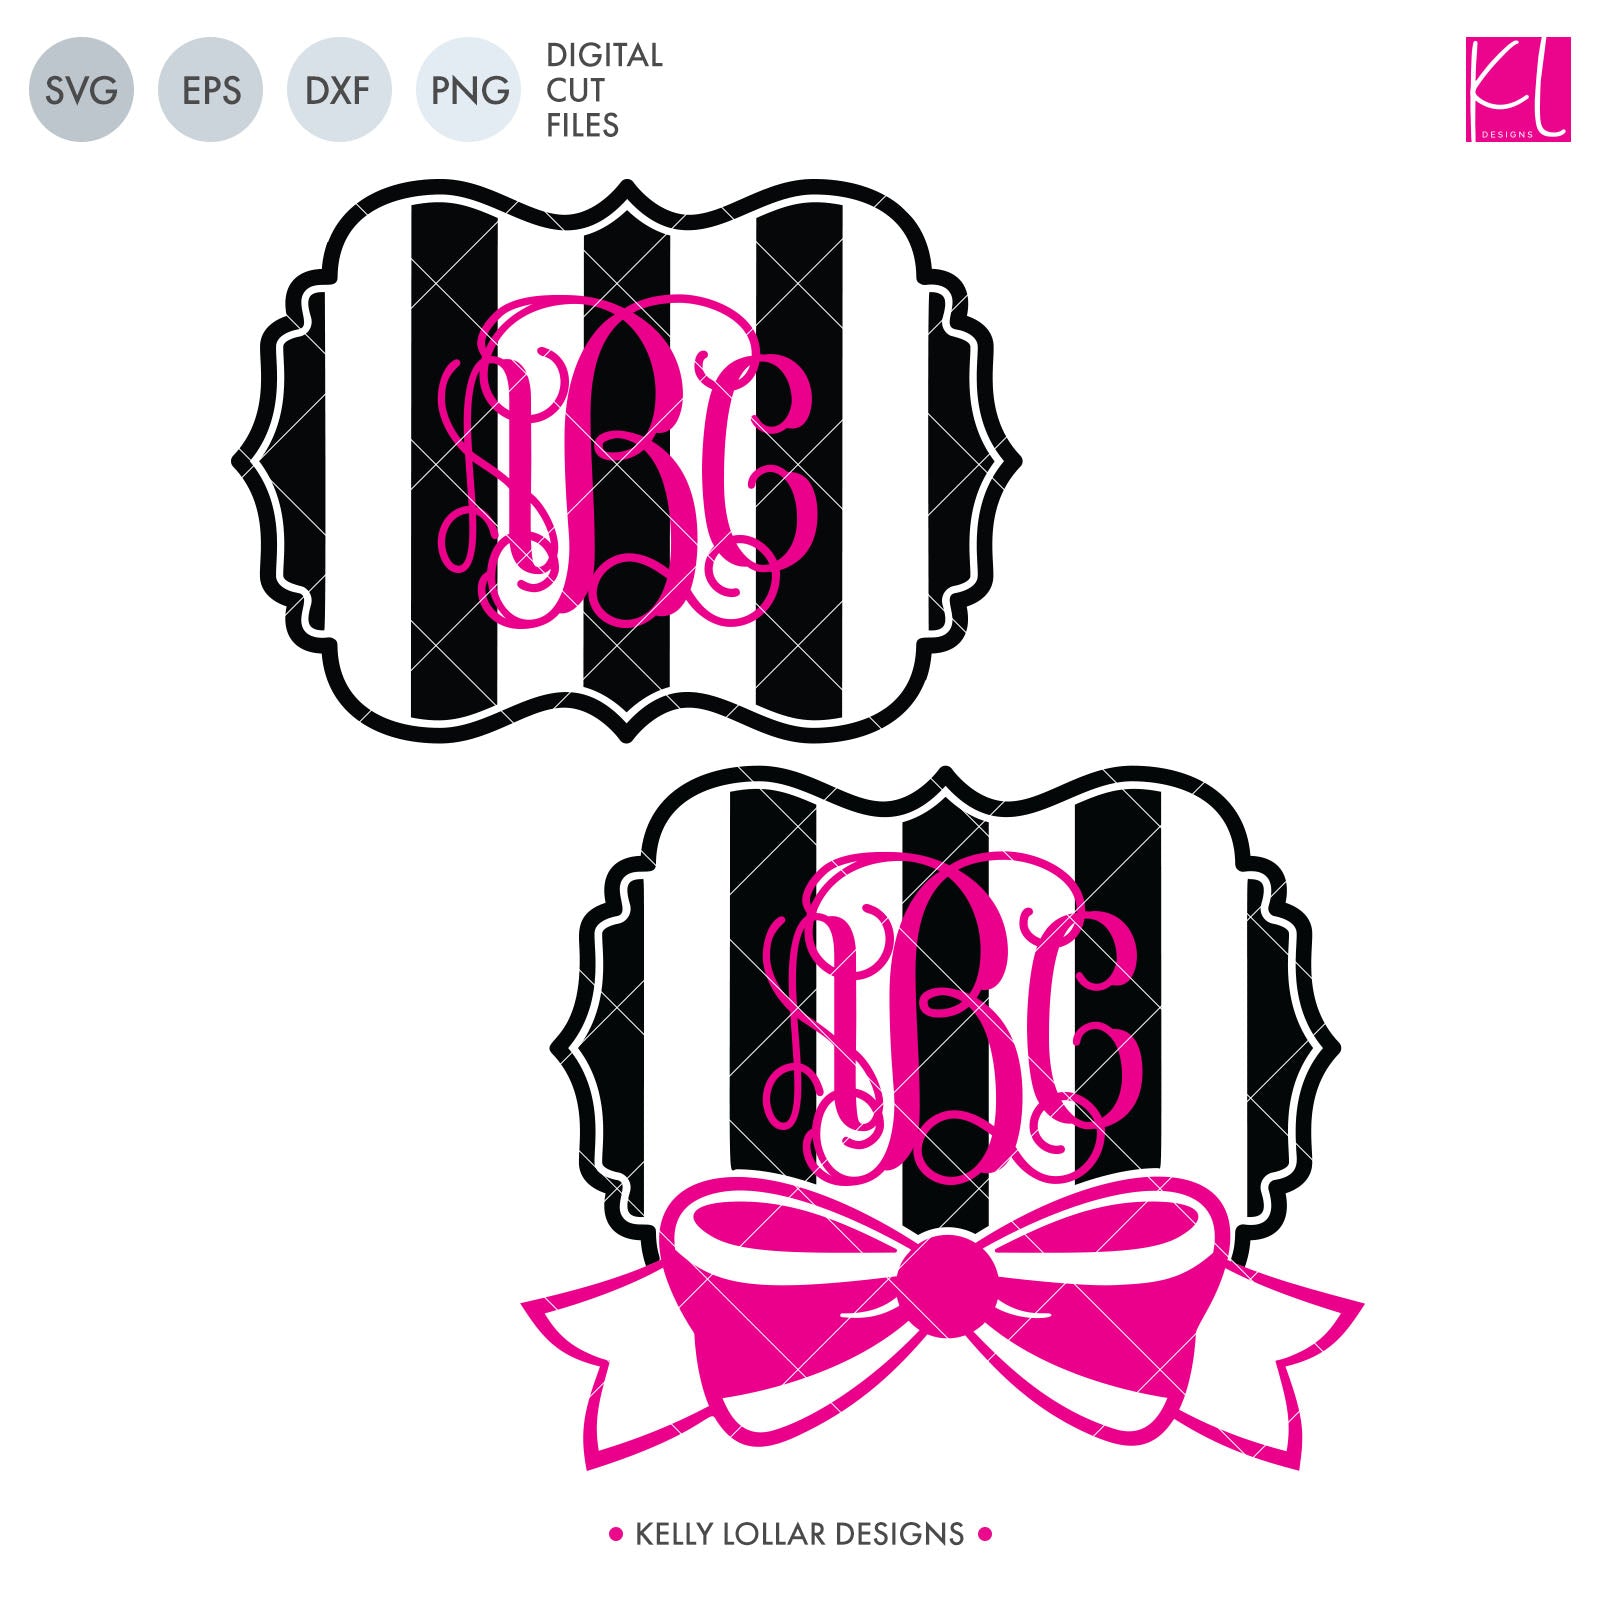 Download Striped Monogram with Bow SVG Cut File | Kelly Lollar Designs